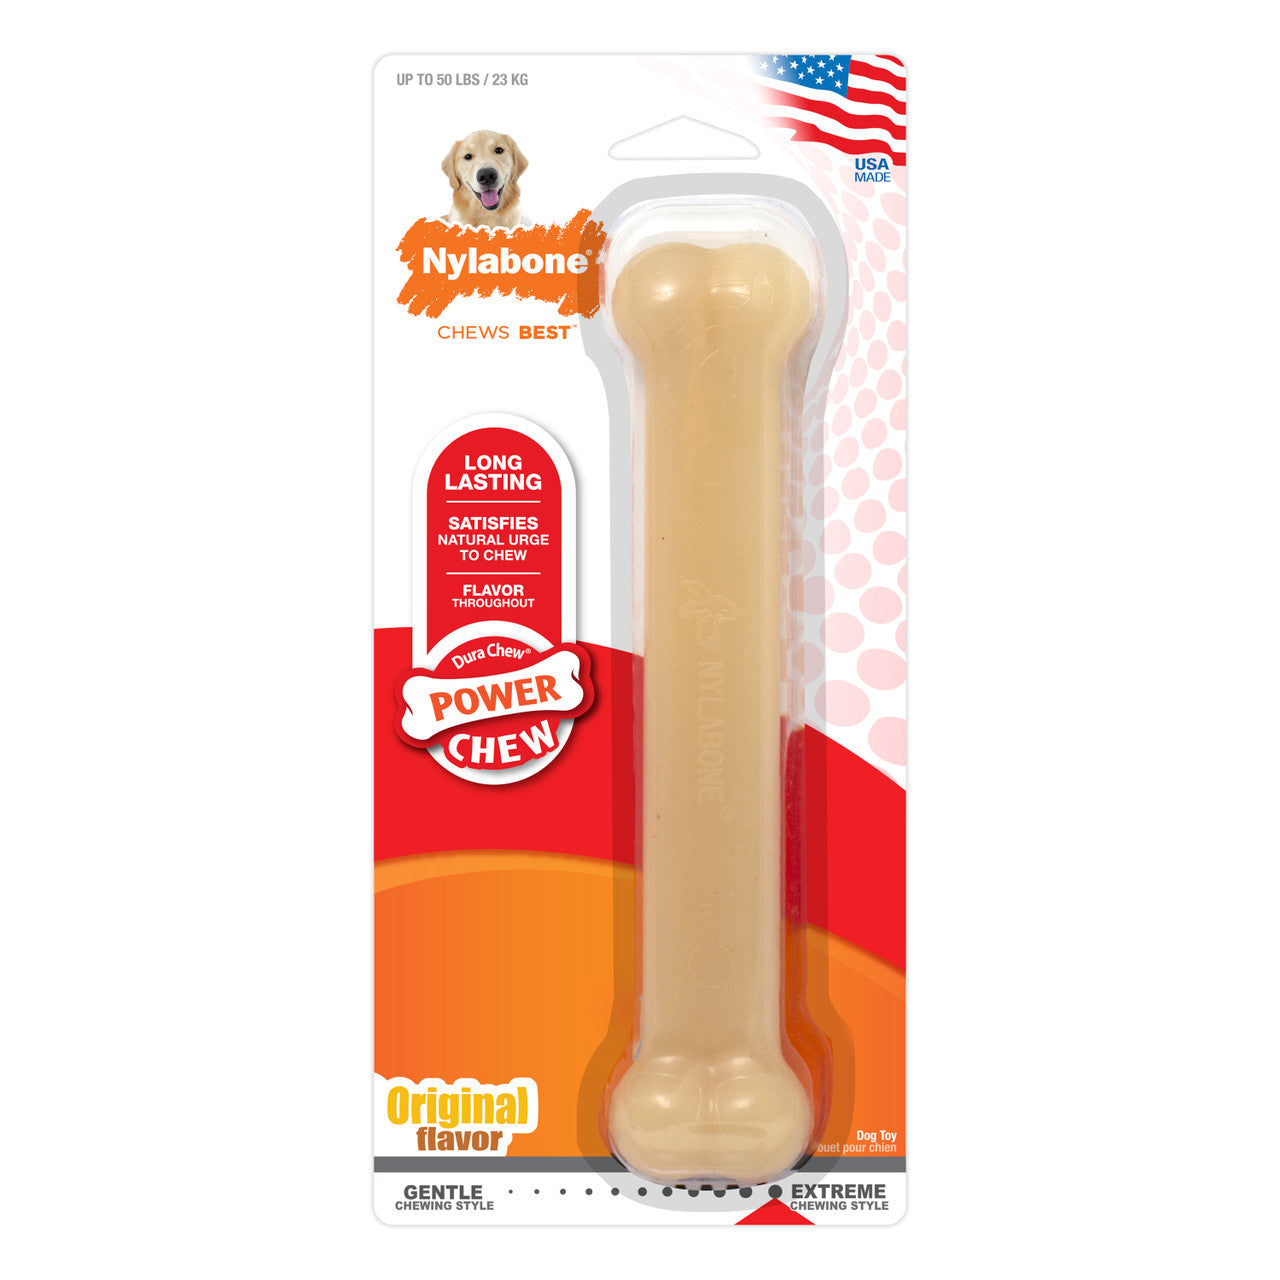 Nylabone Power Chew Durable Dog Toy Original Large/Giant (1 Count)